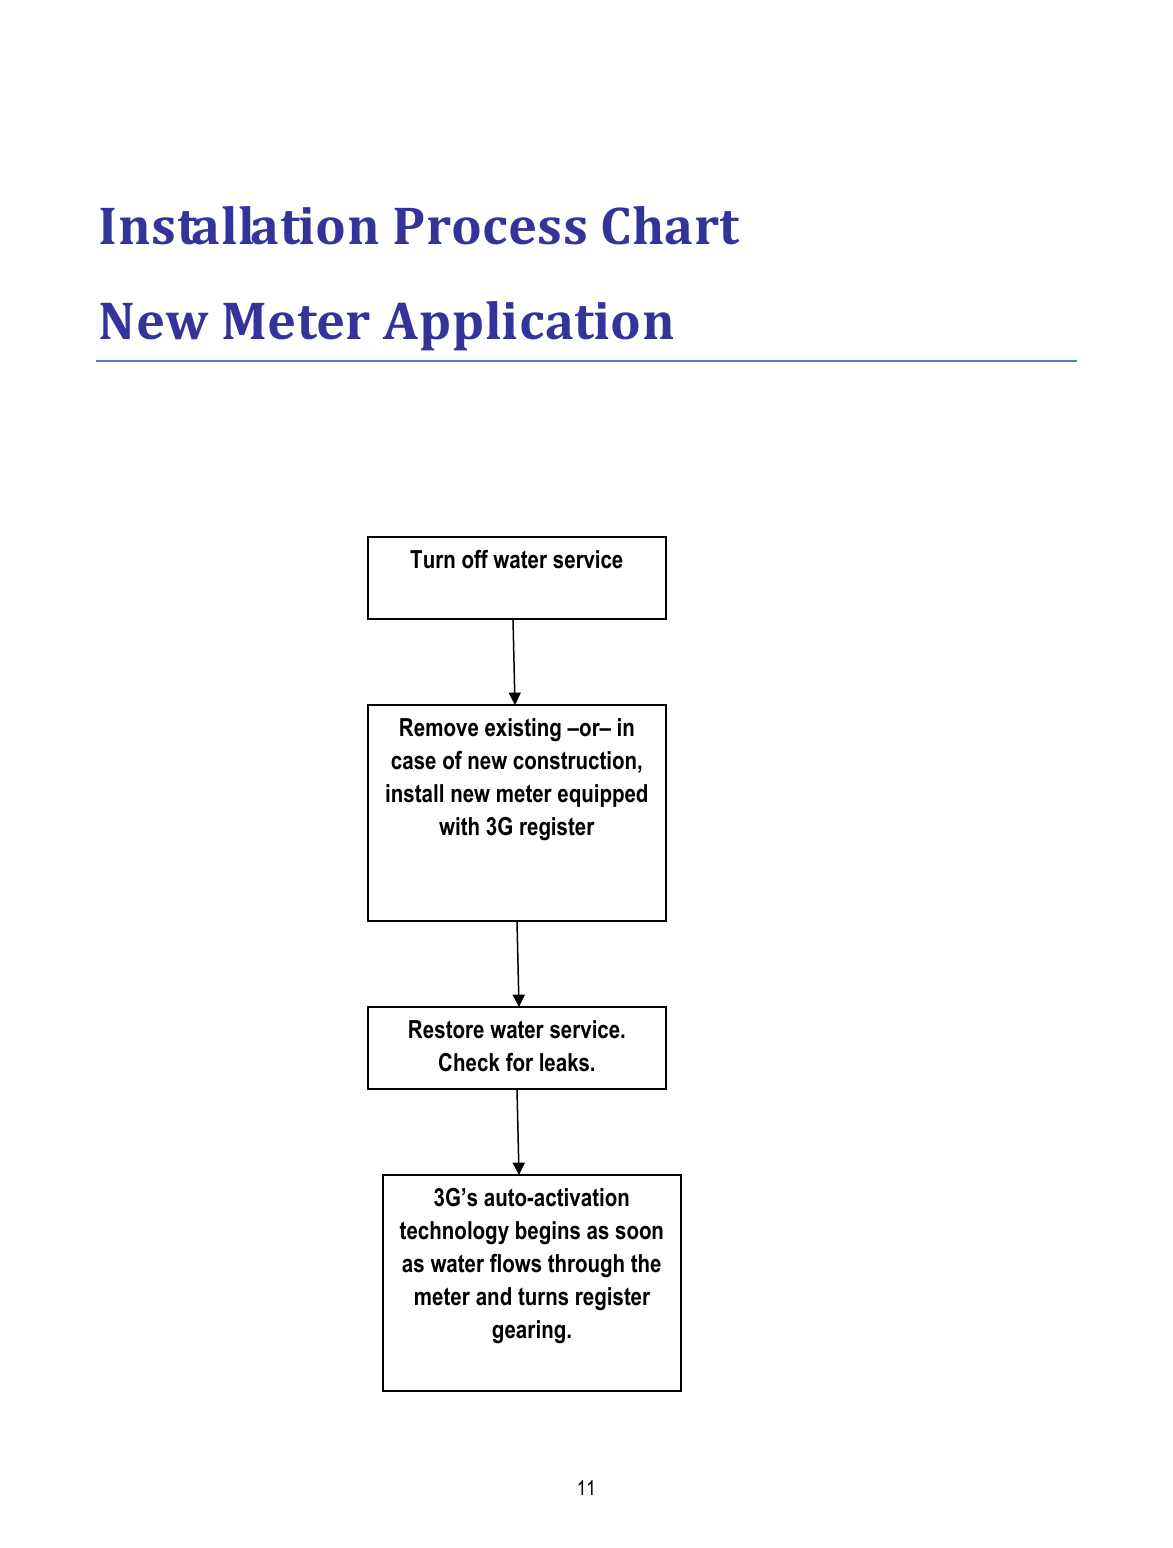  11   Installation Process Chart  New Meter Application Turn off water service Remove existing –or– in case of new construction, install new meter equipped with 3G register Restore water service. Check for leaks. 3G’s auto-activation technology begins as soon as water flows through the meter and turns register gearing. 